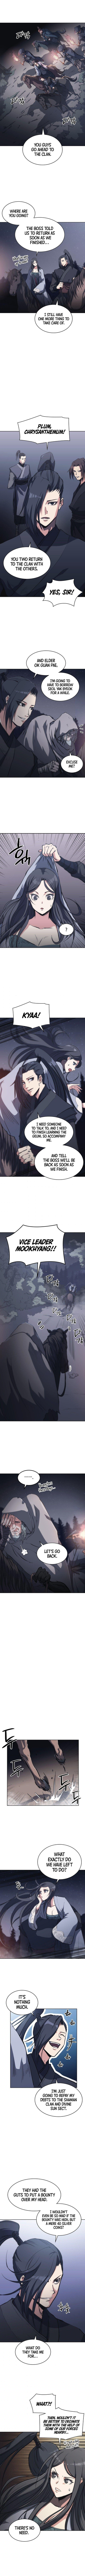 MookHyang - The Origin - Chapter 21 Page 4